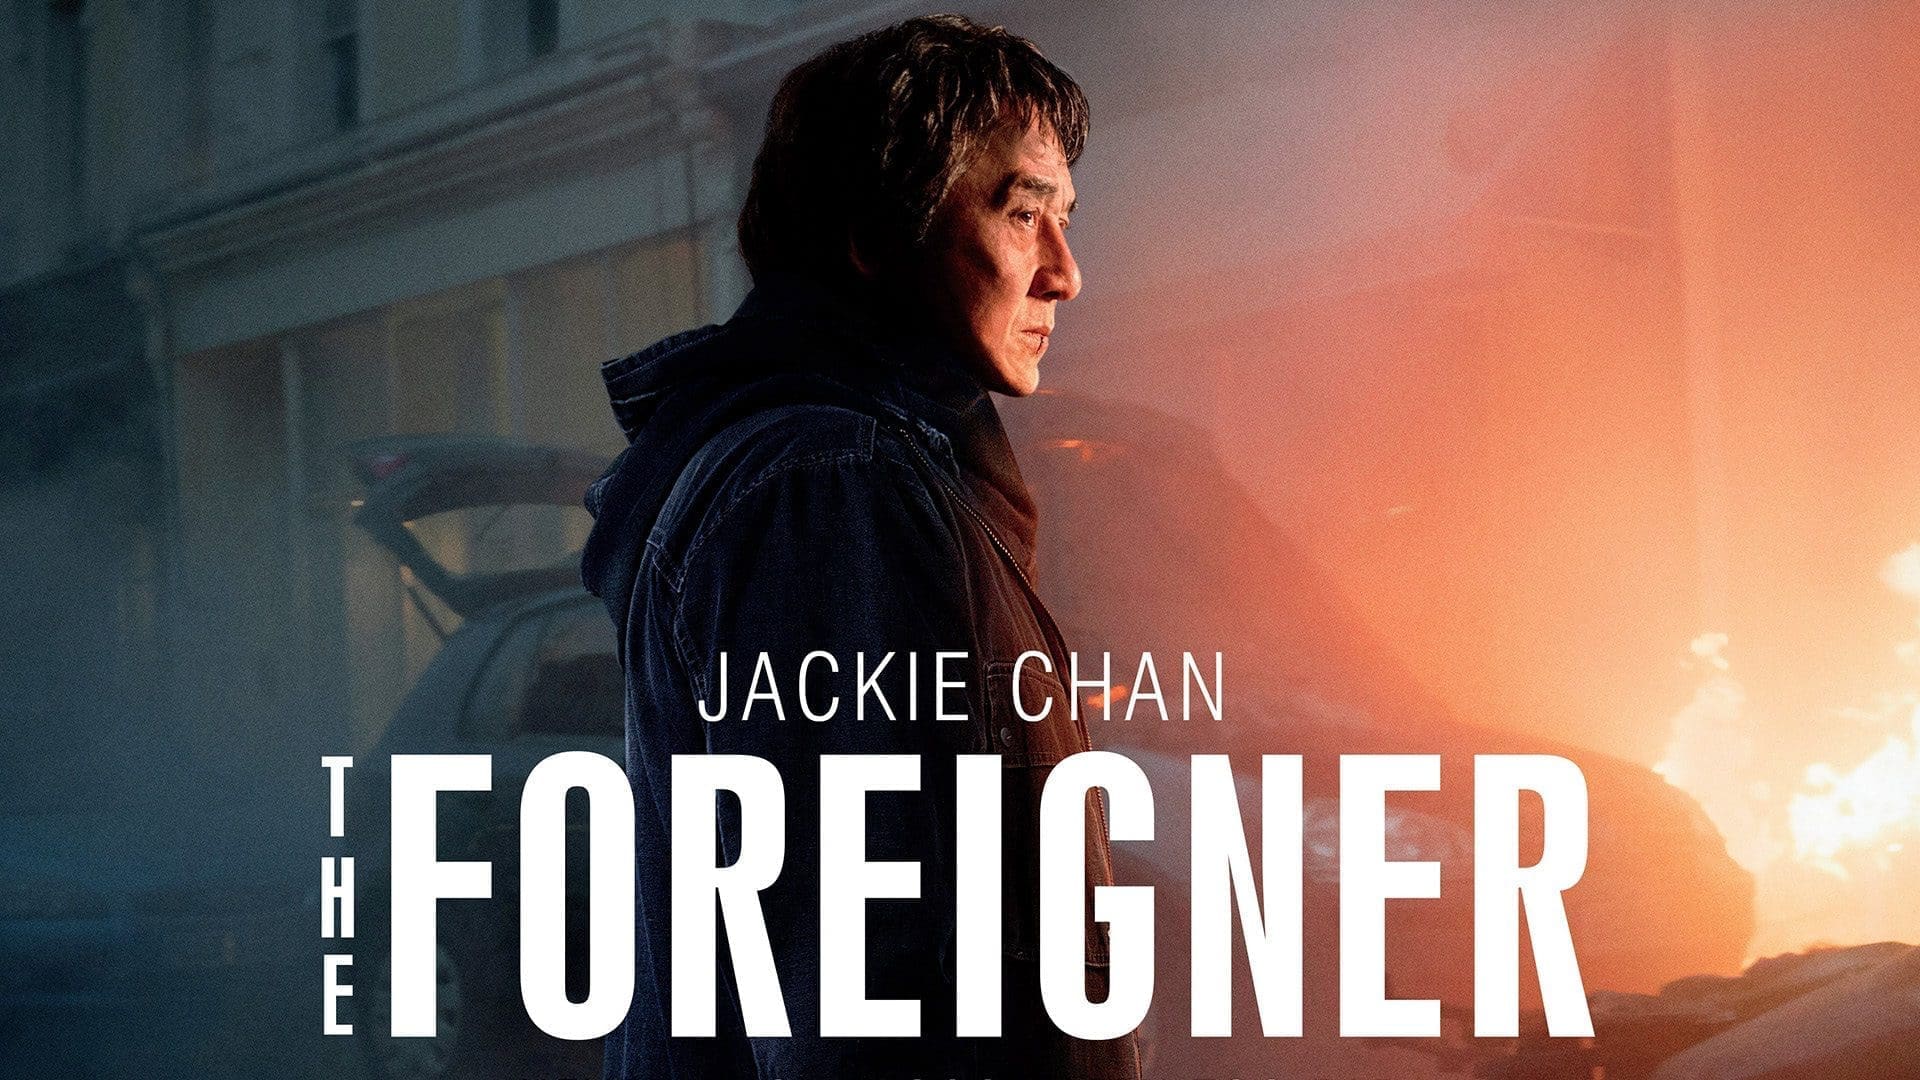 jackie chan, Katie Leung, movie review, Pierce Brosnan, the foreigner